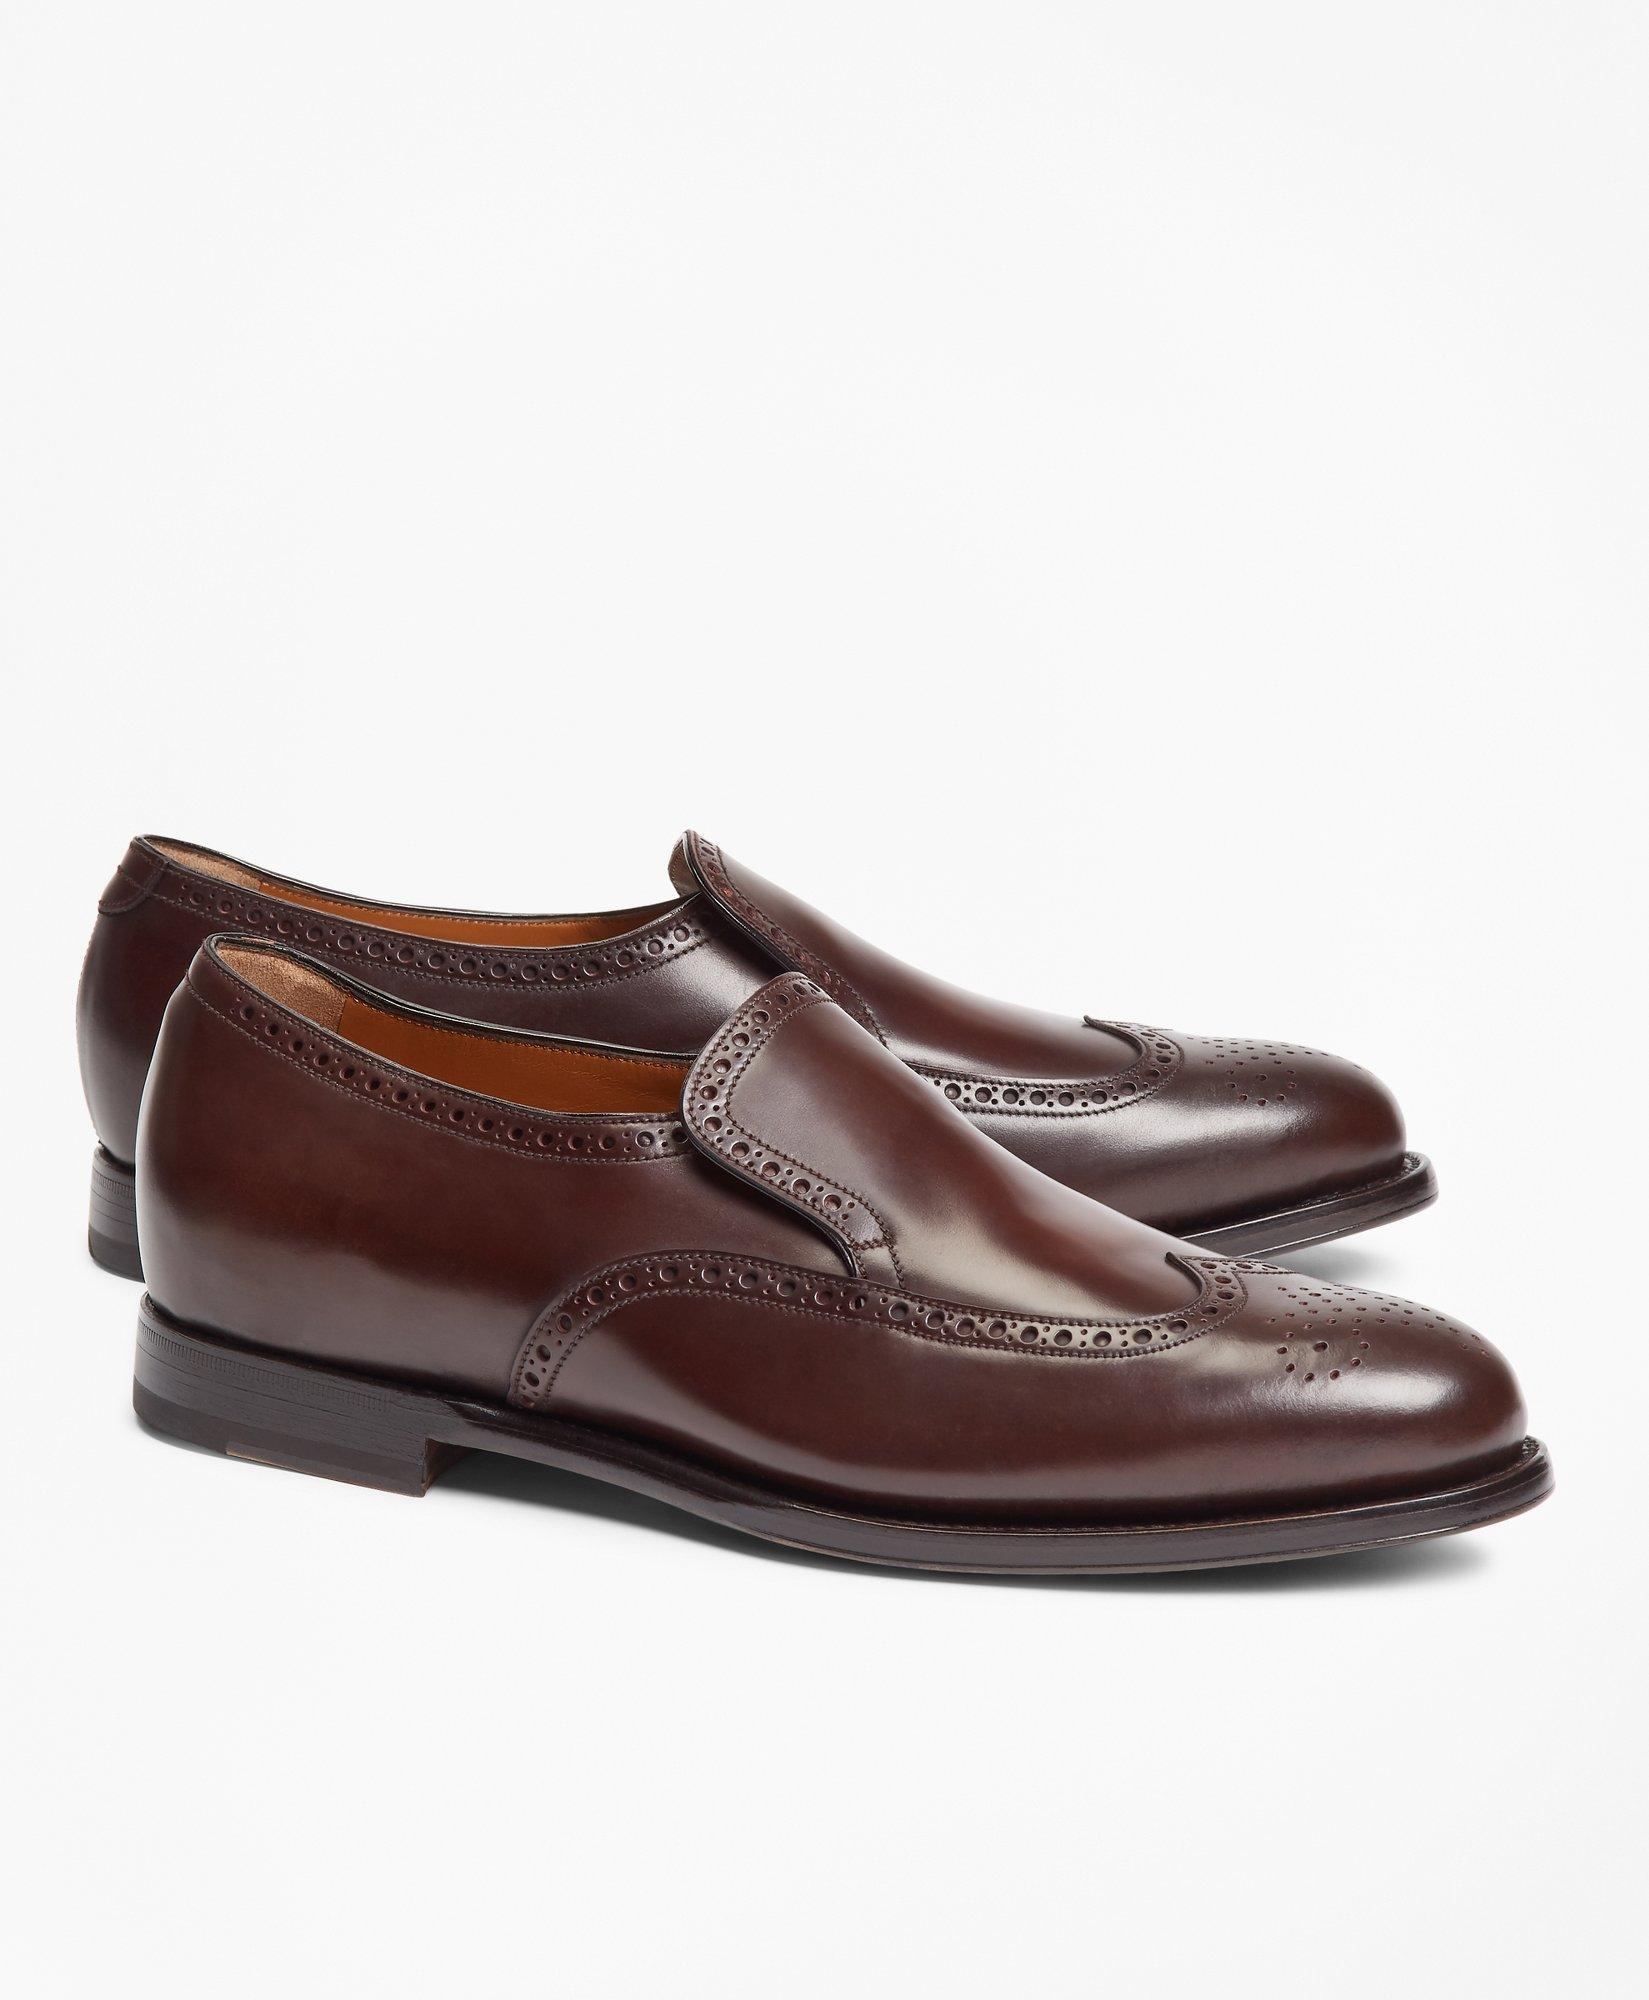 200th Anniversary Limited-Edition Golden Fleece® Cordovan Wingtip Loafers